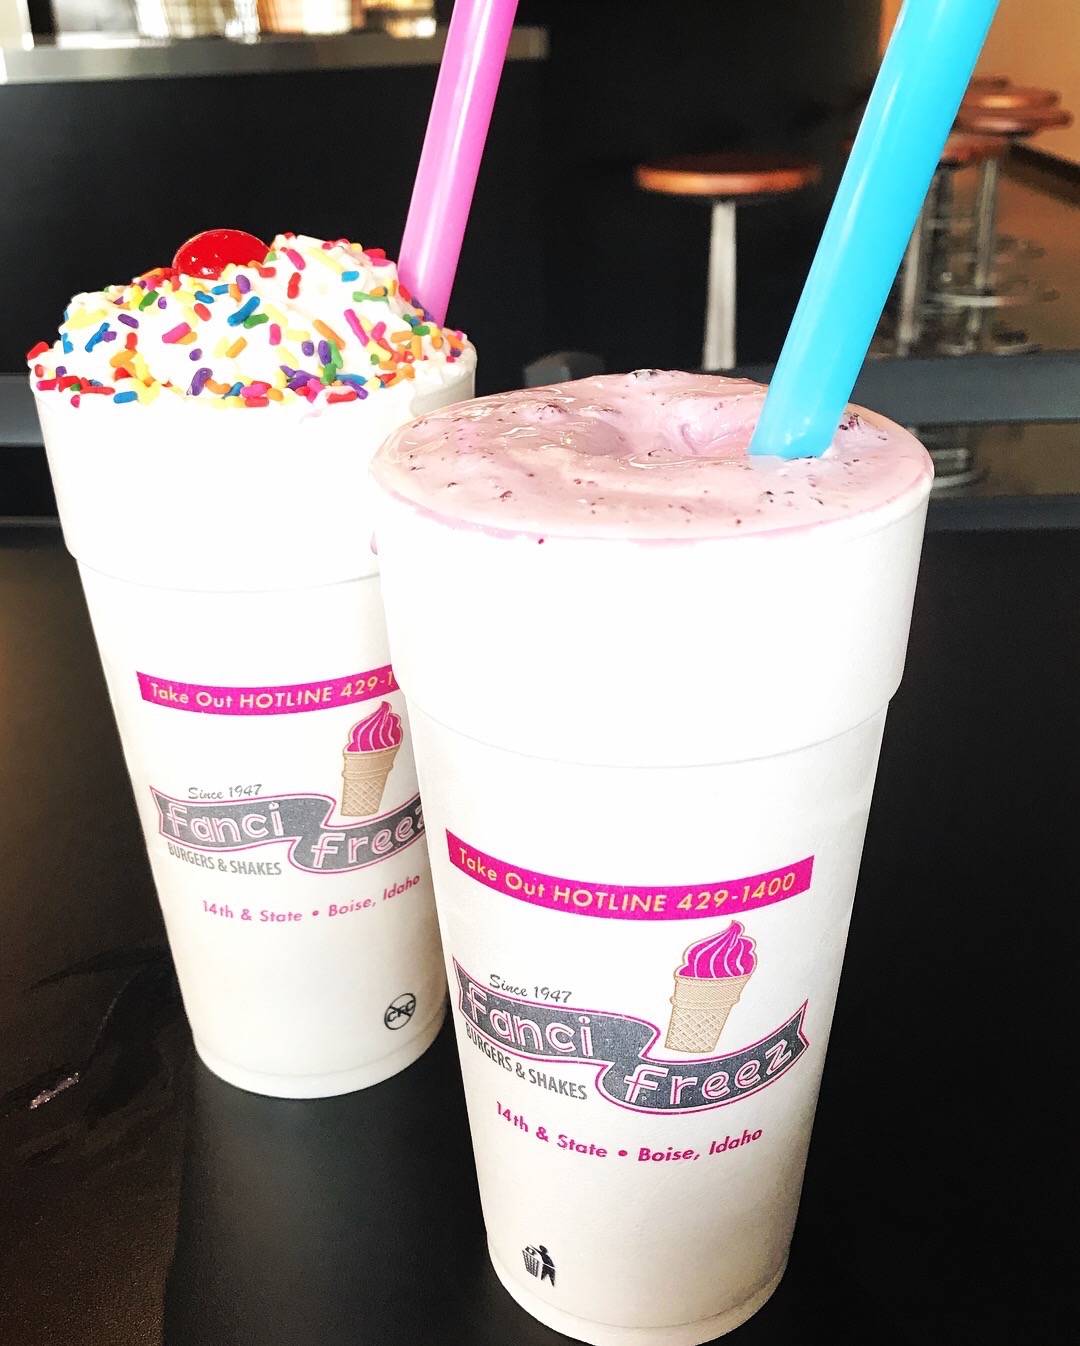 Shakes, sprinkles, cherry from Fanci Freeze in Boise and Meridian Idaho.